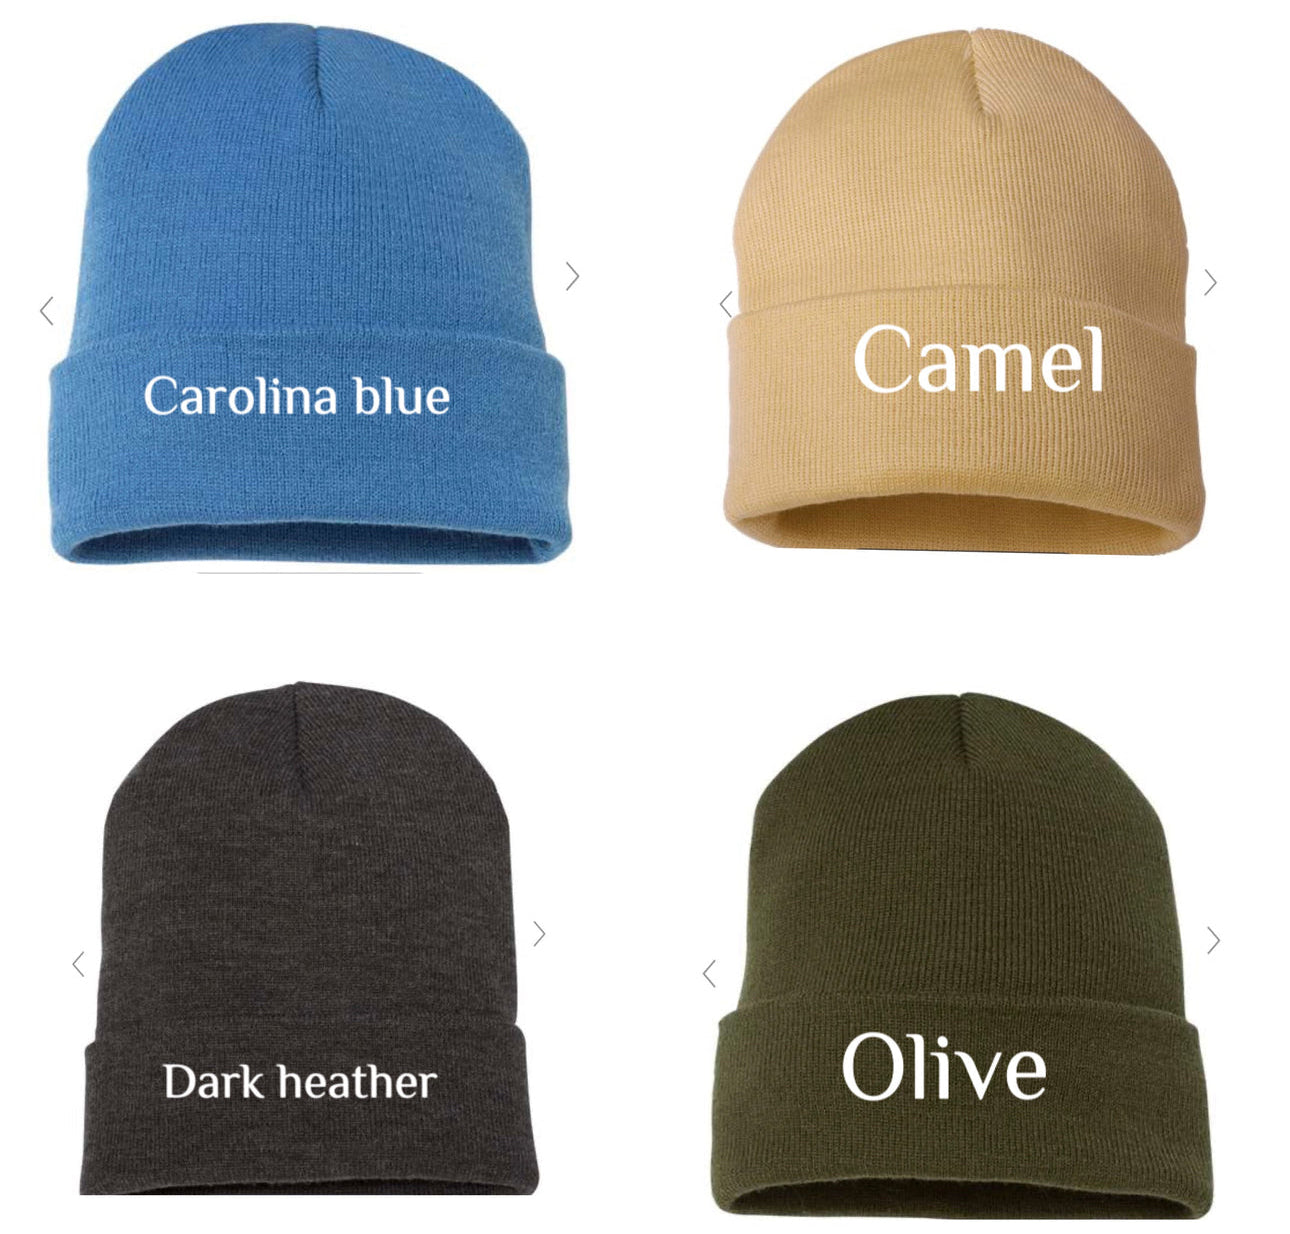 Custom embroidered hats